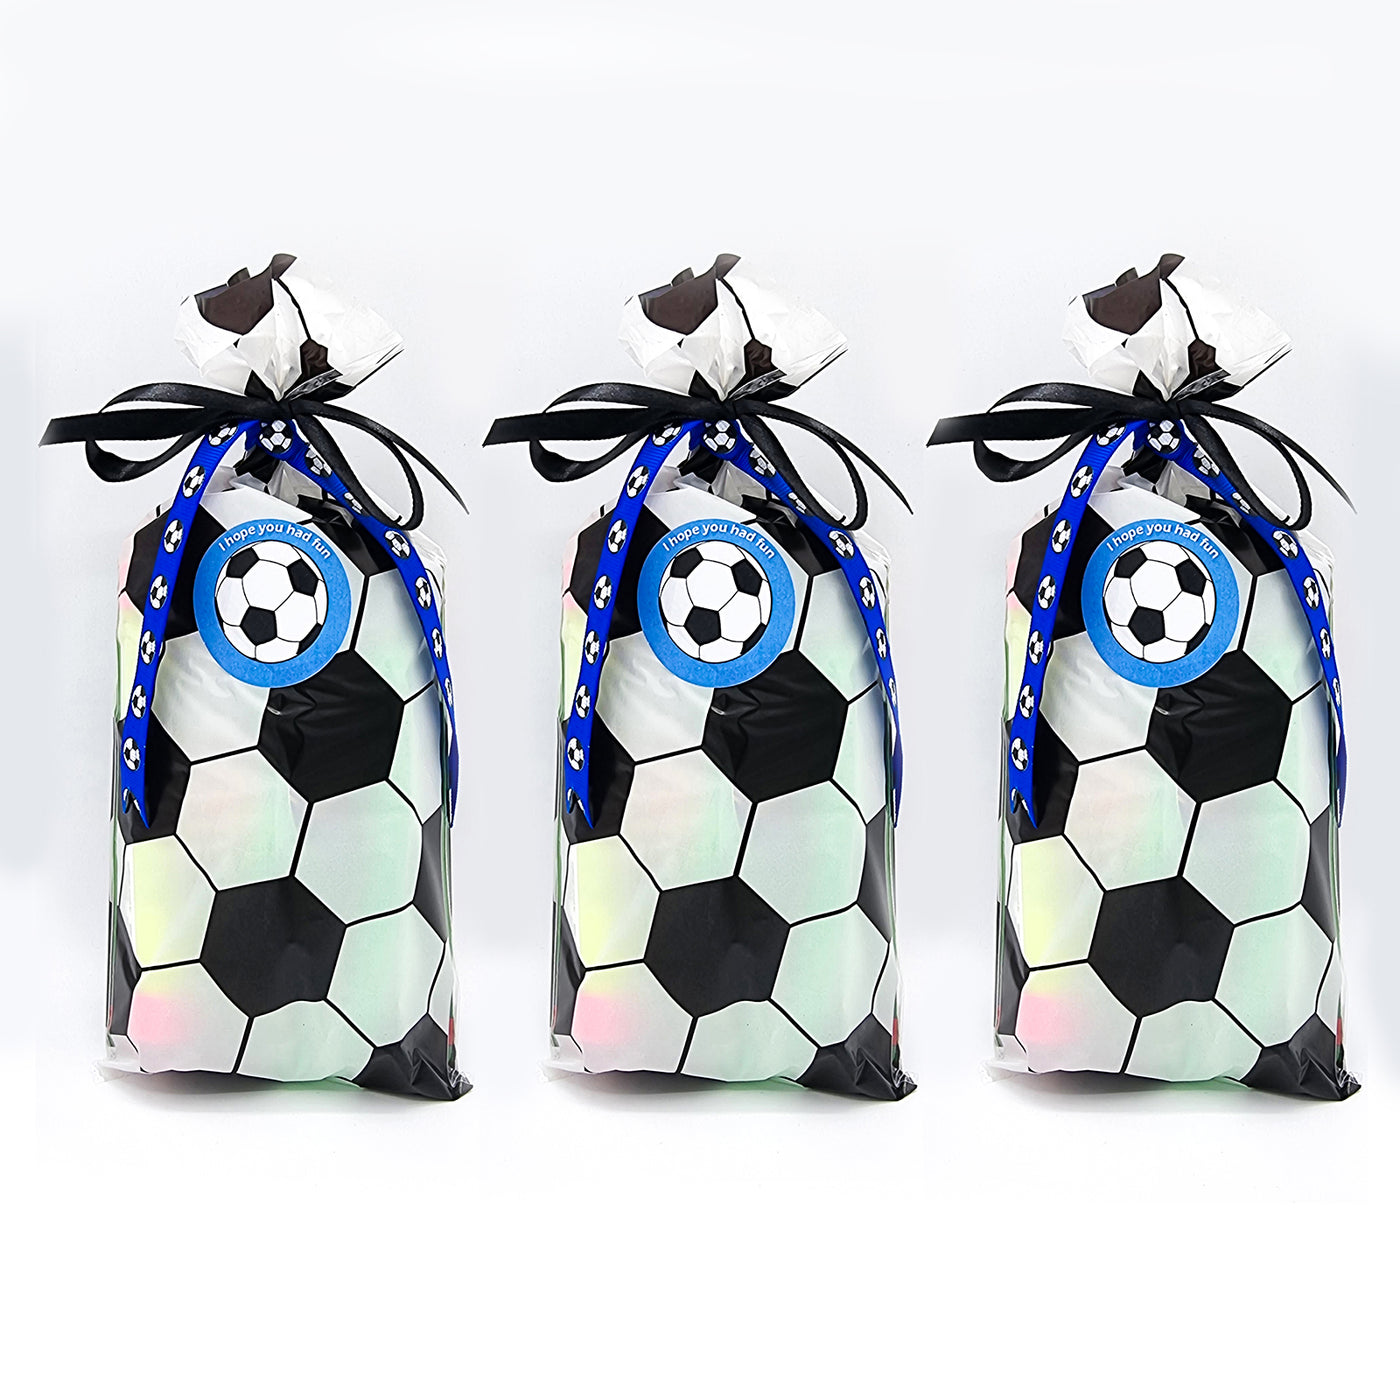 Pre Filled Blue Party Football Goody Bags With Novelty Toys And Sweets, Football Party Favours.